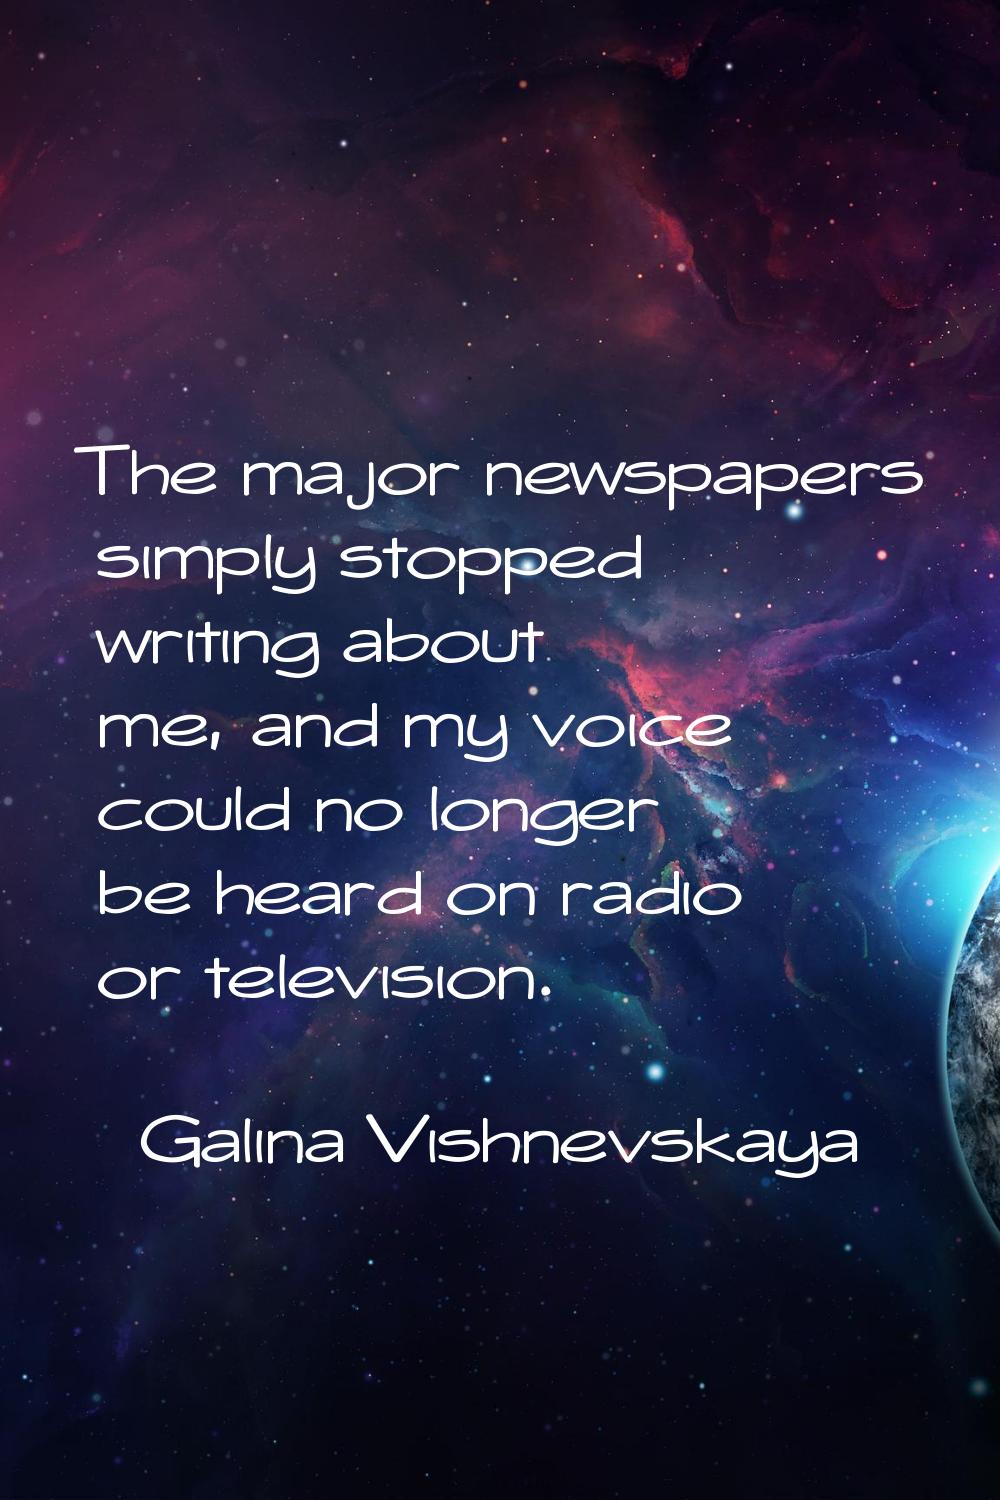 The major newspapers simply stopped writing about me, and my voice could no longer be heard on radi